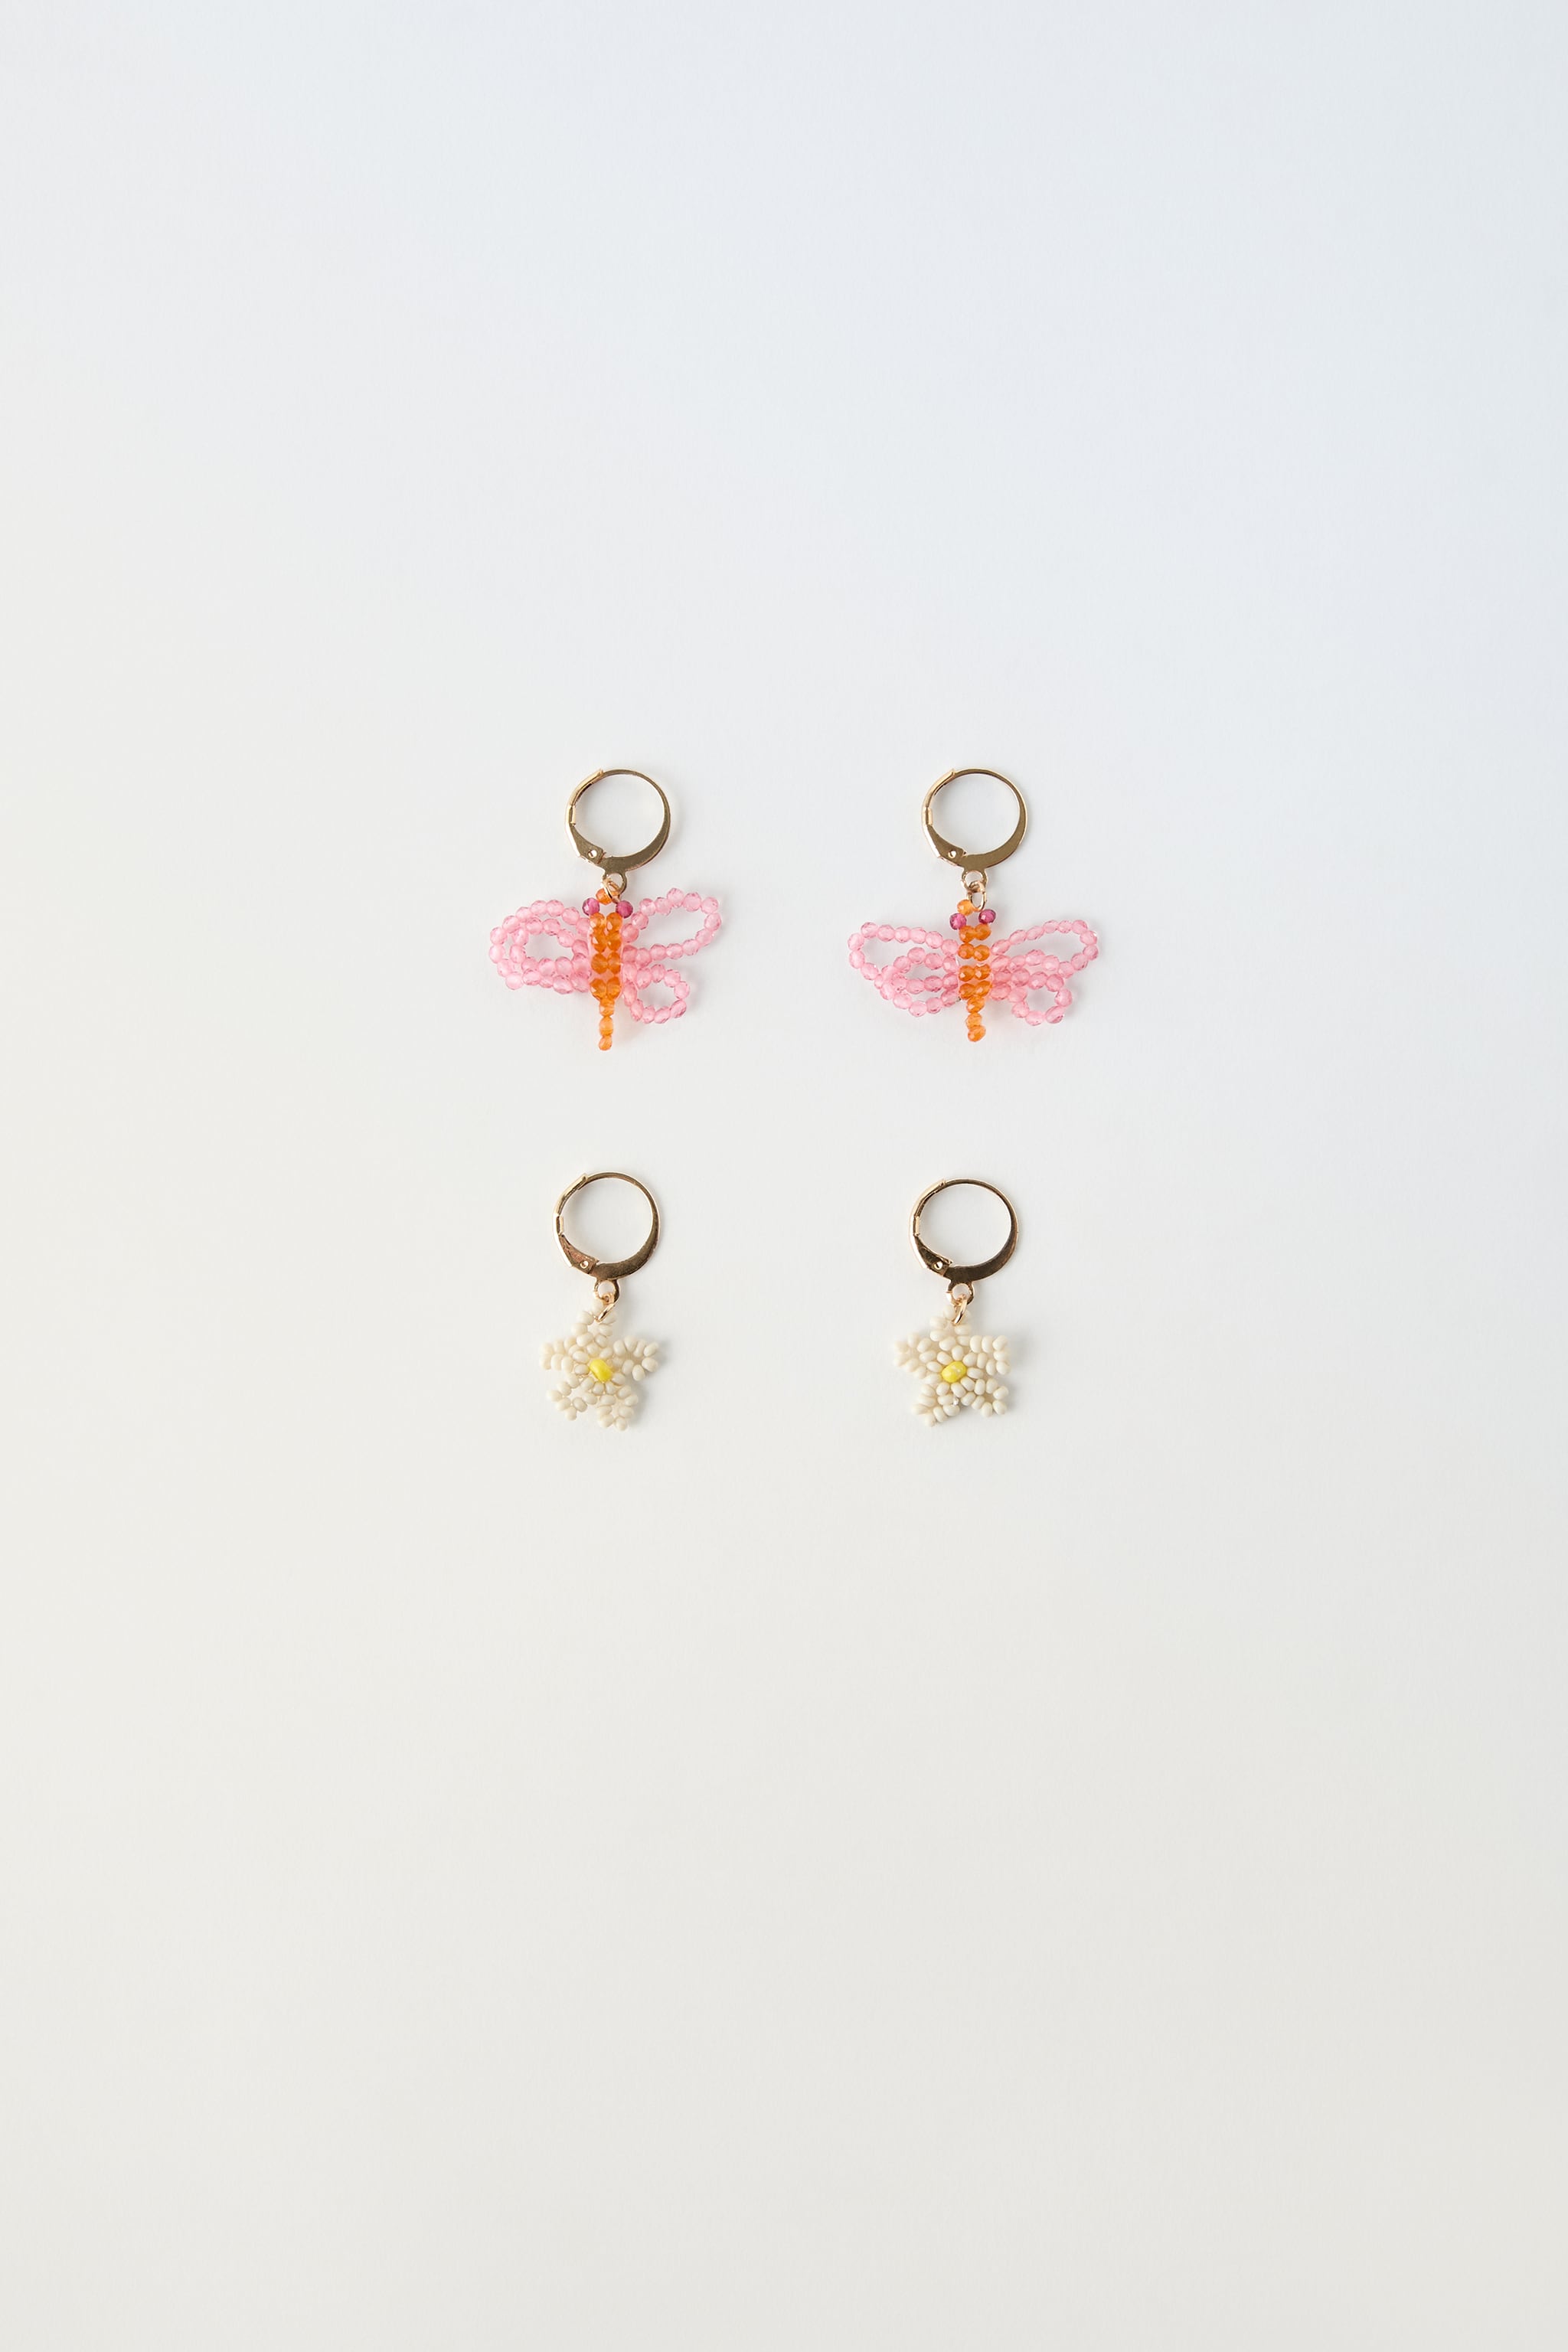 TWO-PACK OF FLORAL AND DRAGONFLY EARRINGS